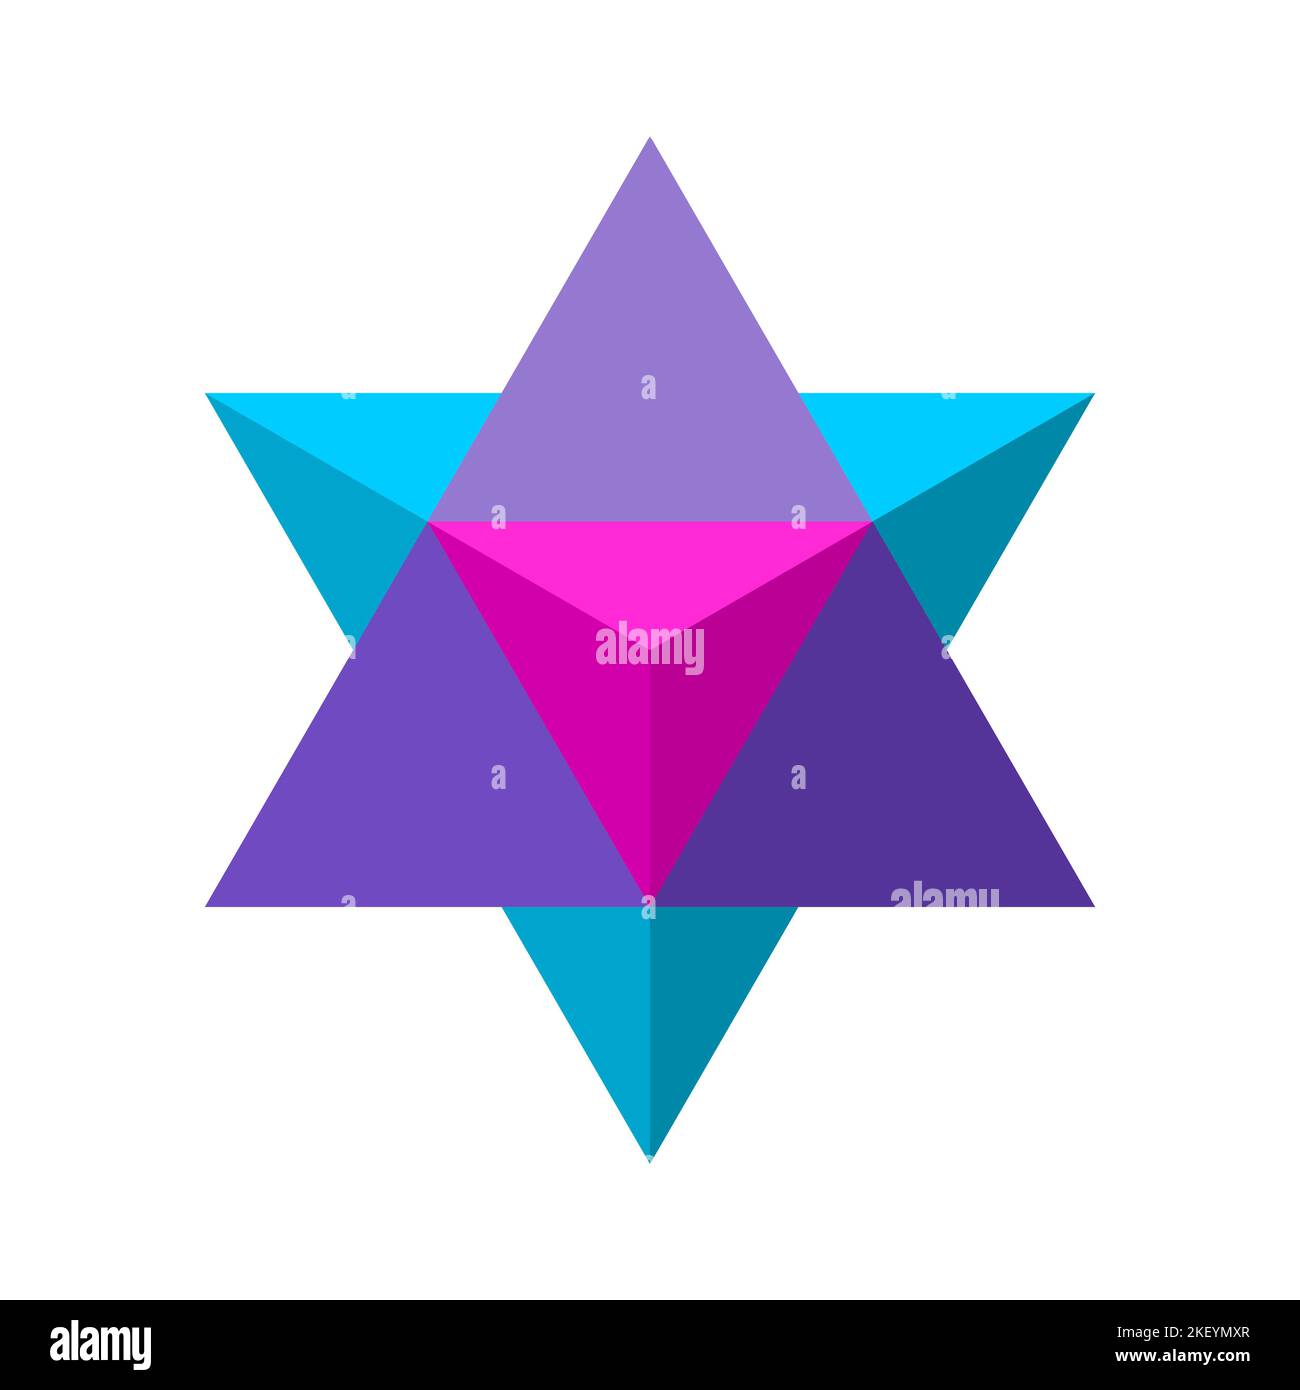 Colorful stylized Merkaba symbol. Sacred geometry shape. Star tetrahedron. 3D object made out of two triangles facing opposite directions. Modern logo Stock Vector